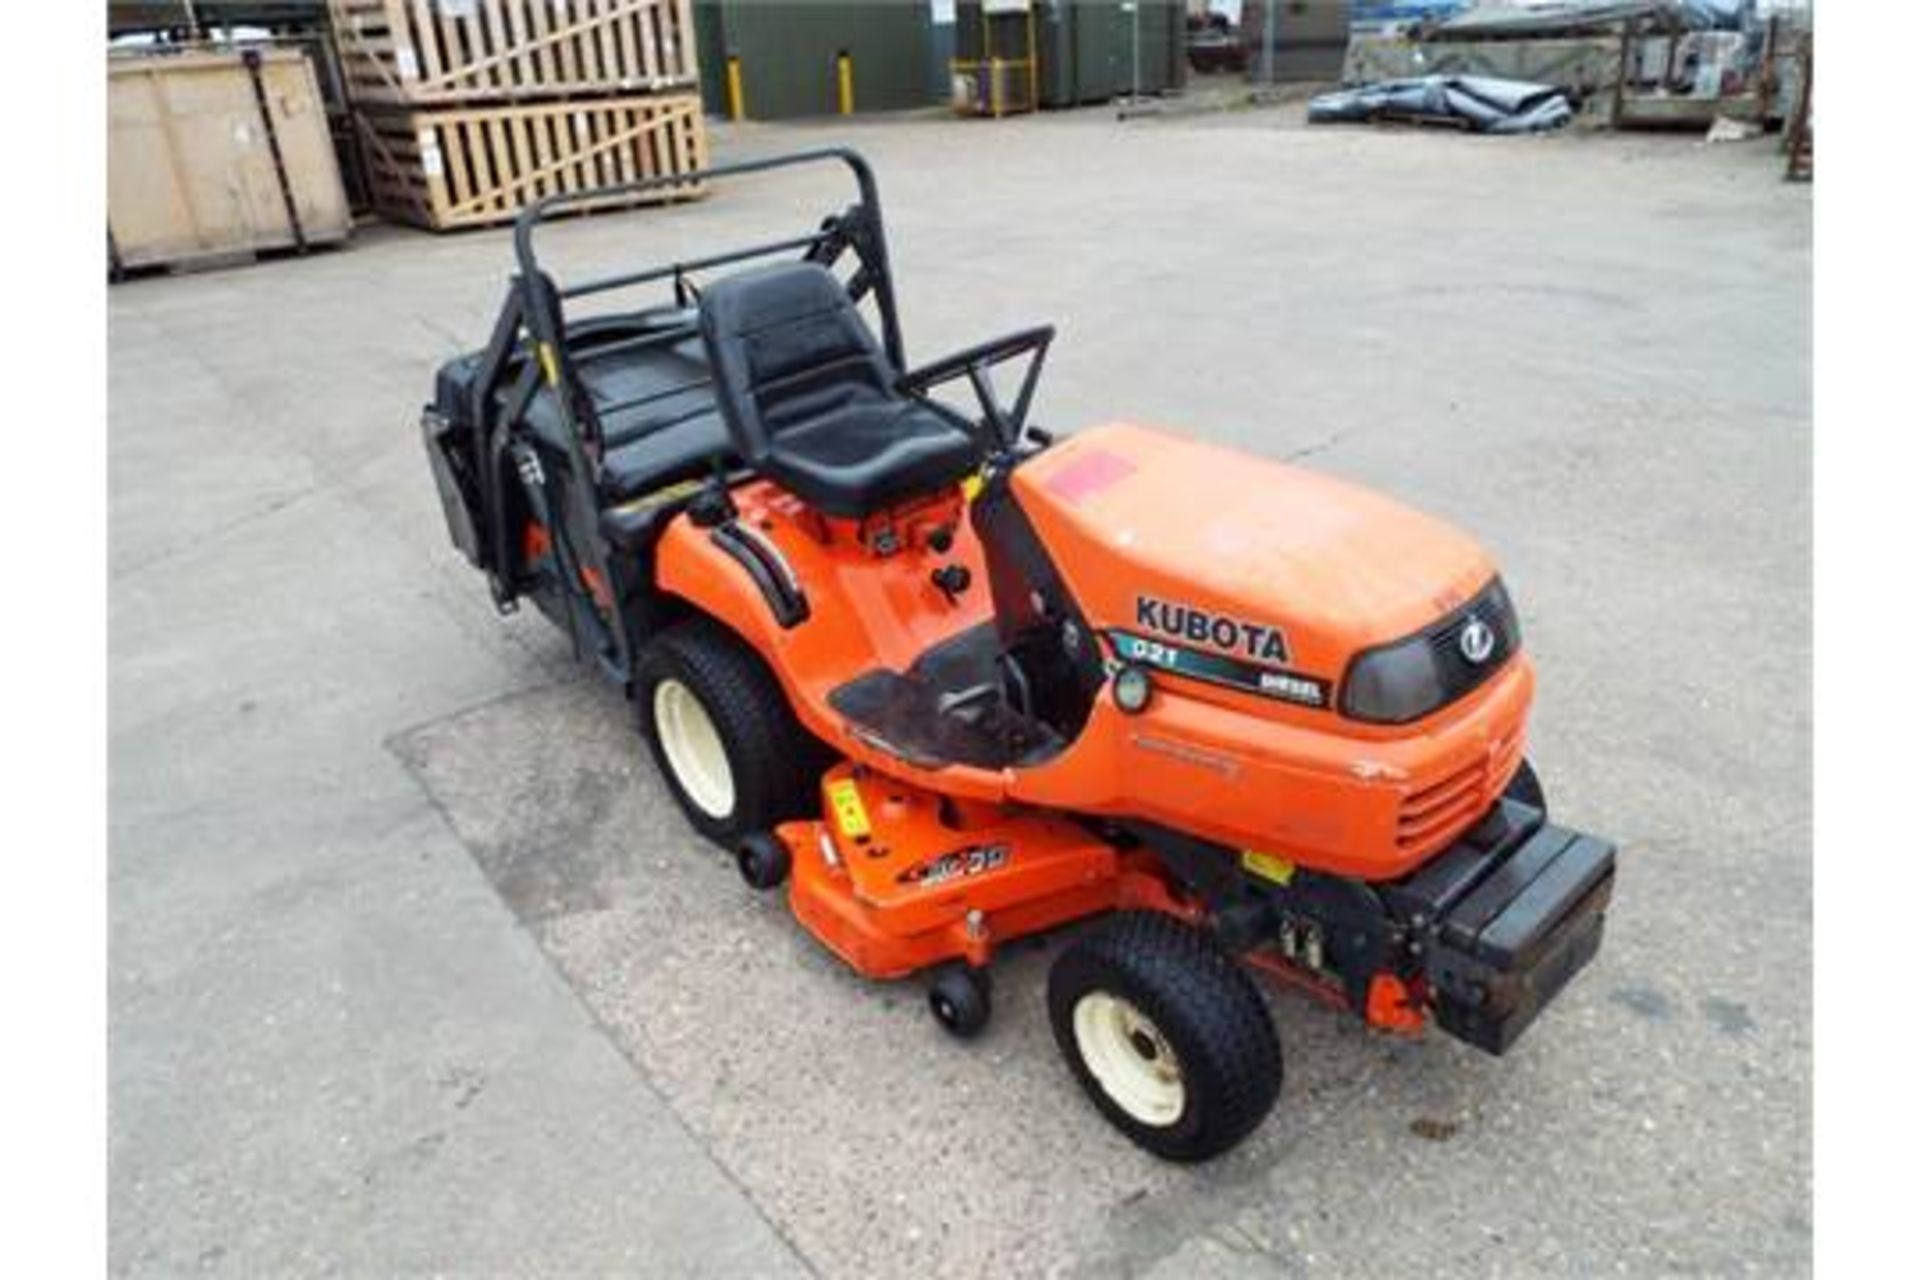 2008 Kubota G21 Ride On Mower with Glide-Cut System and High Dump Grass Collector - Image 3 of 22